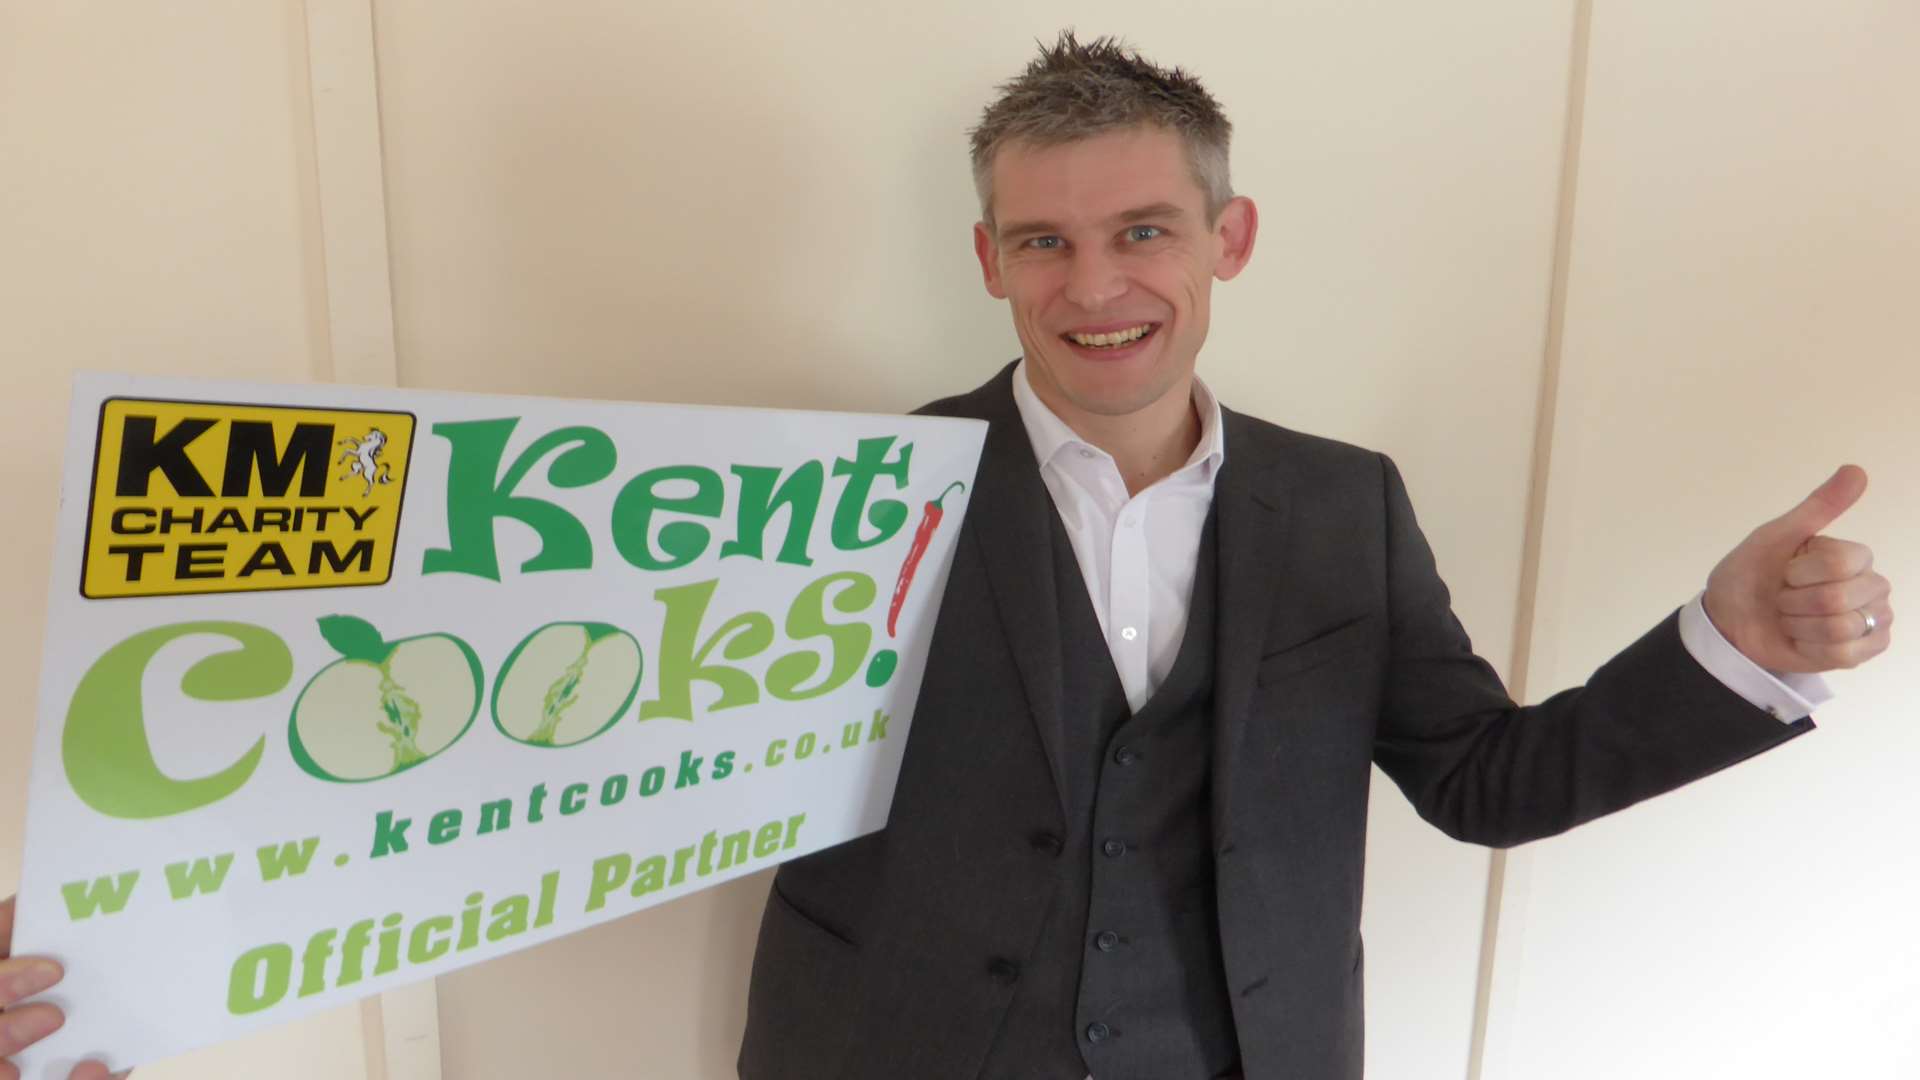 Darren Tutt, of FFK Catering Equipment Suppliers, announces support for school cookery contest Kent Cooks 2016